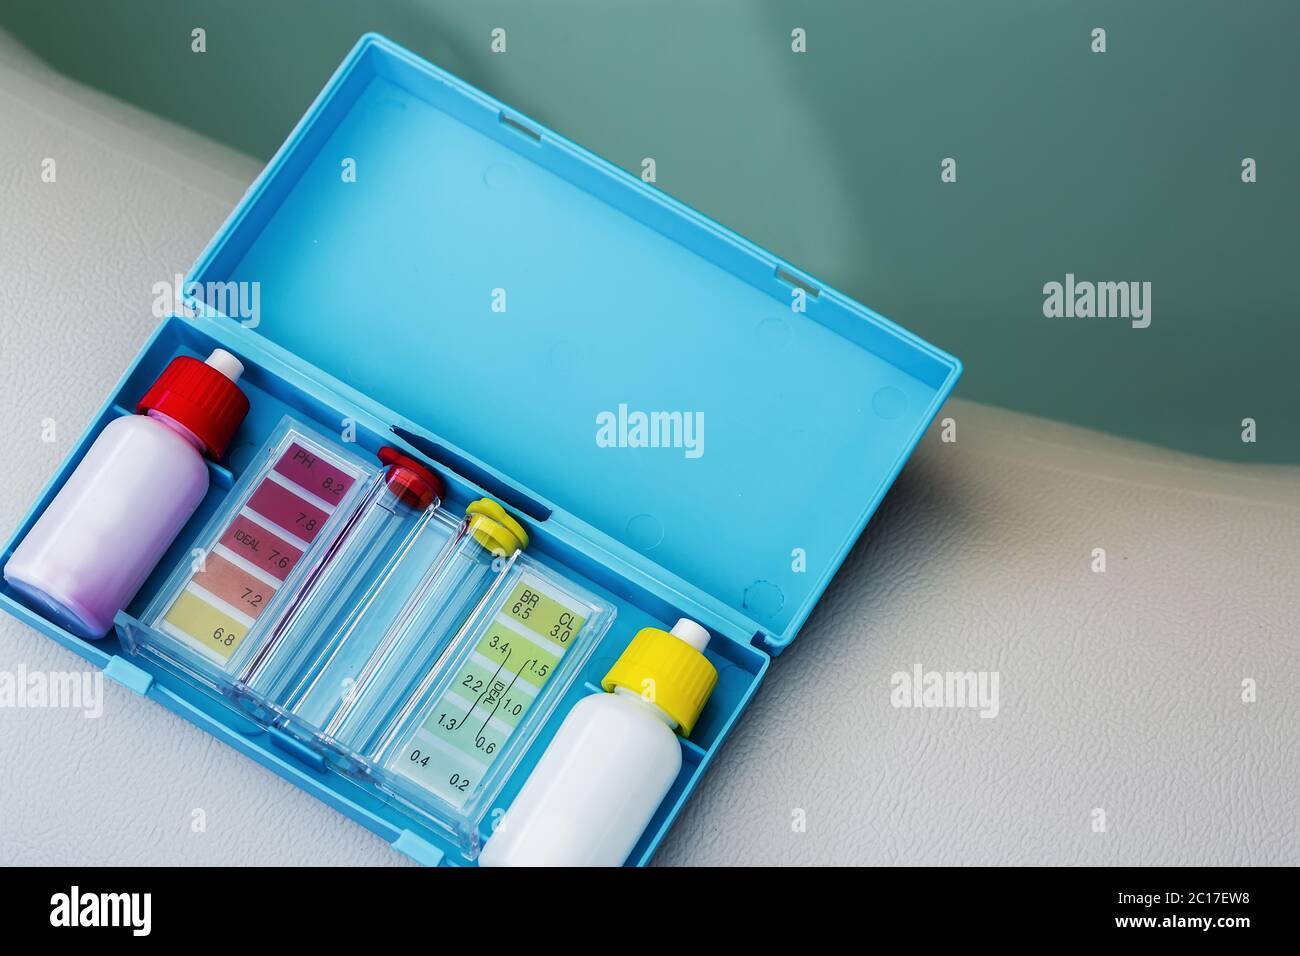 Kit of Ph chlorine and bromide test for water quality test of jacuzzi or pool Stock Photo